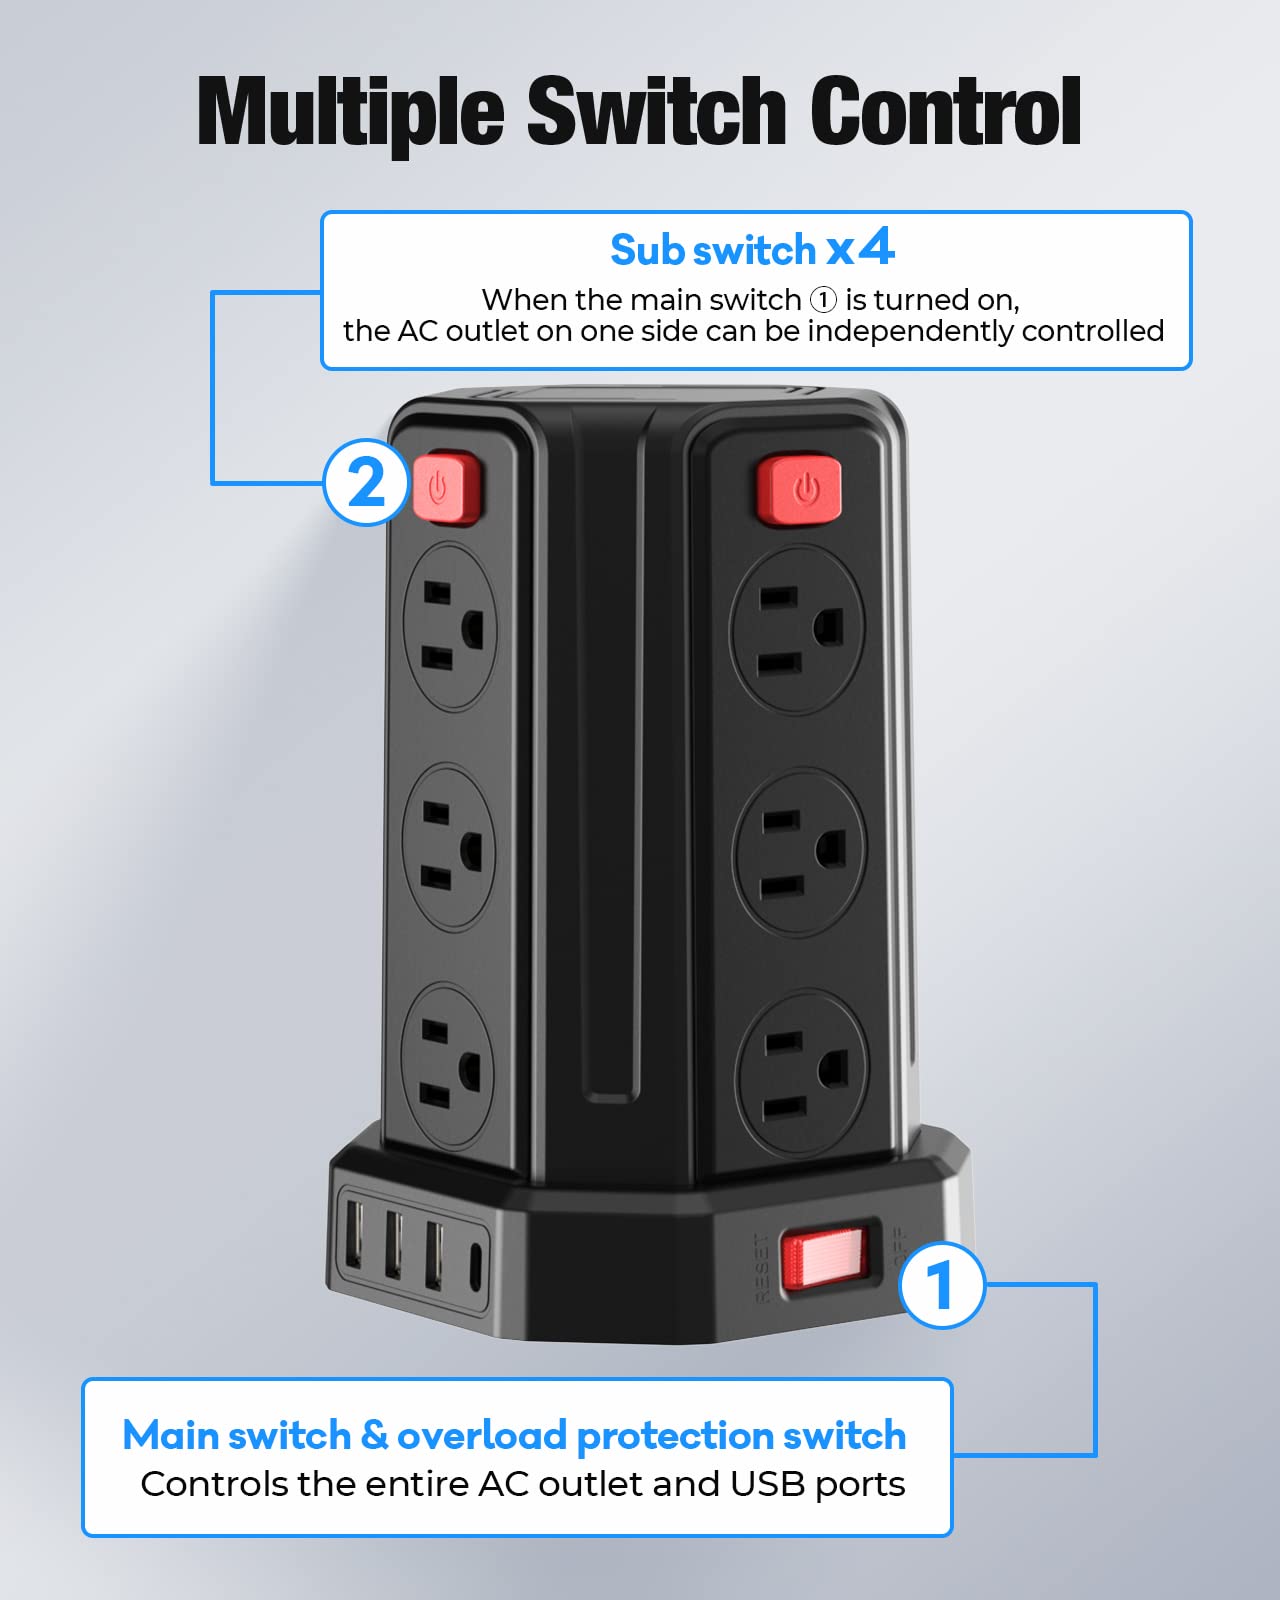 ZYC05 Power Strip Surge Protector Only $20.99 At Amazon prime day!